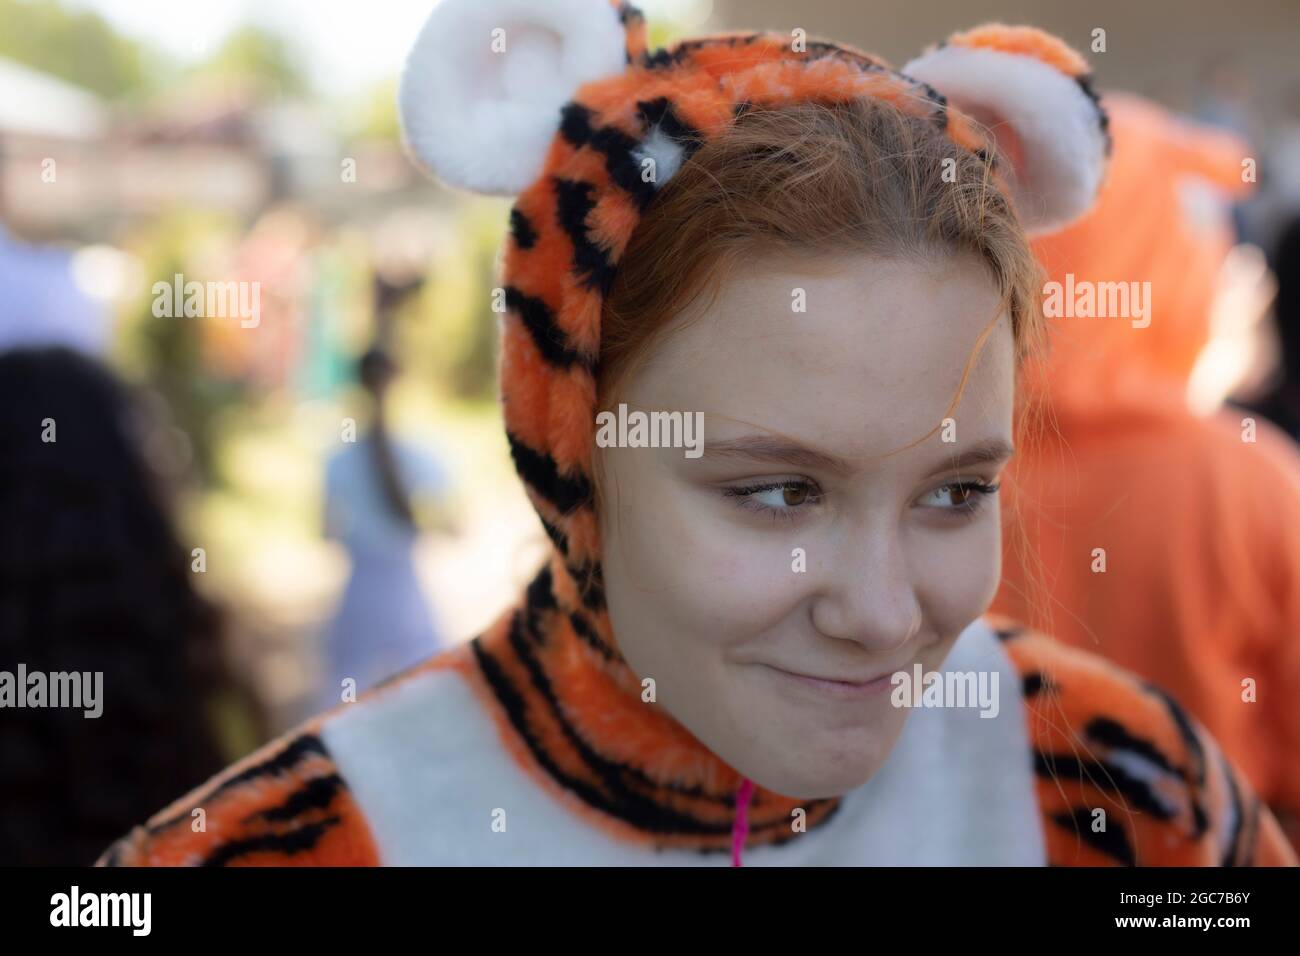 A girl dressed as a tiger. Children's animotr in a soft costume of a wild cat. A cute girl with red hair dressed in a cheerful outfit. Stock Photo